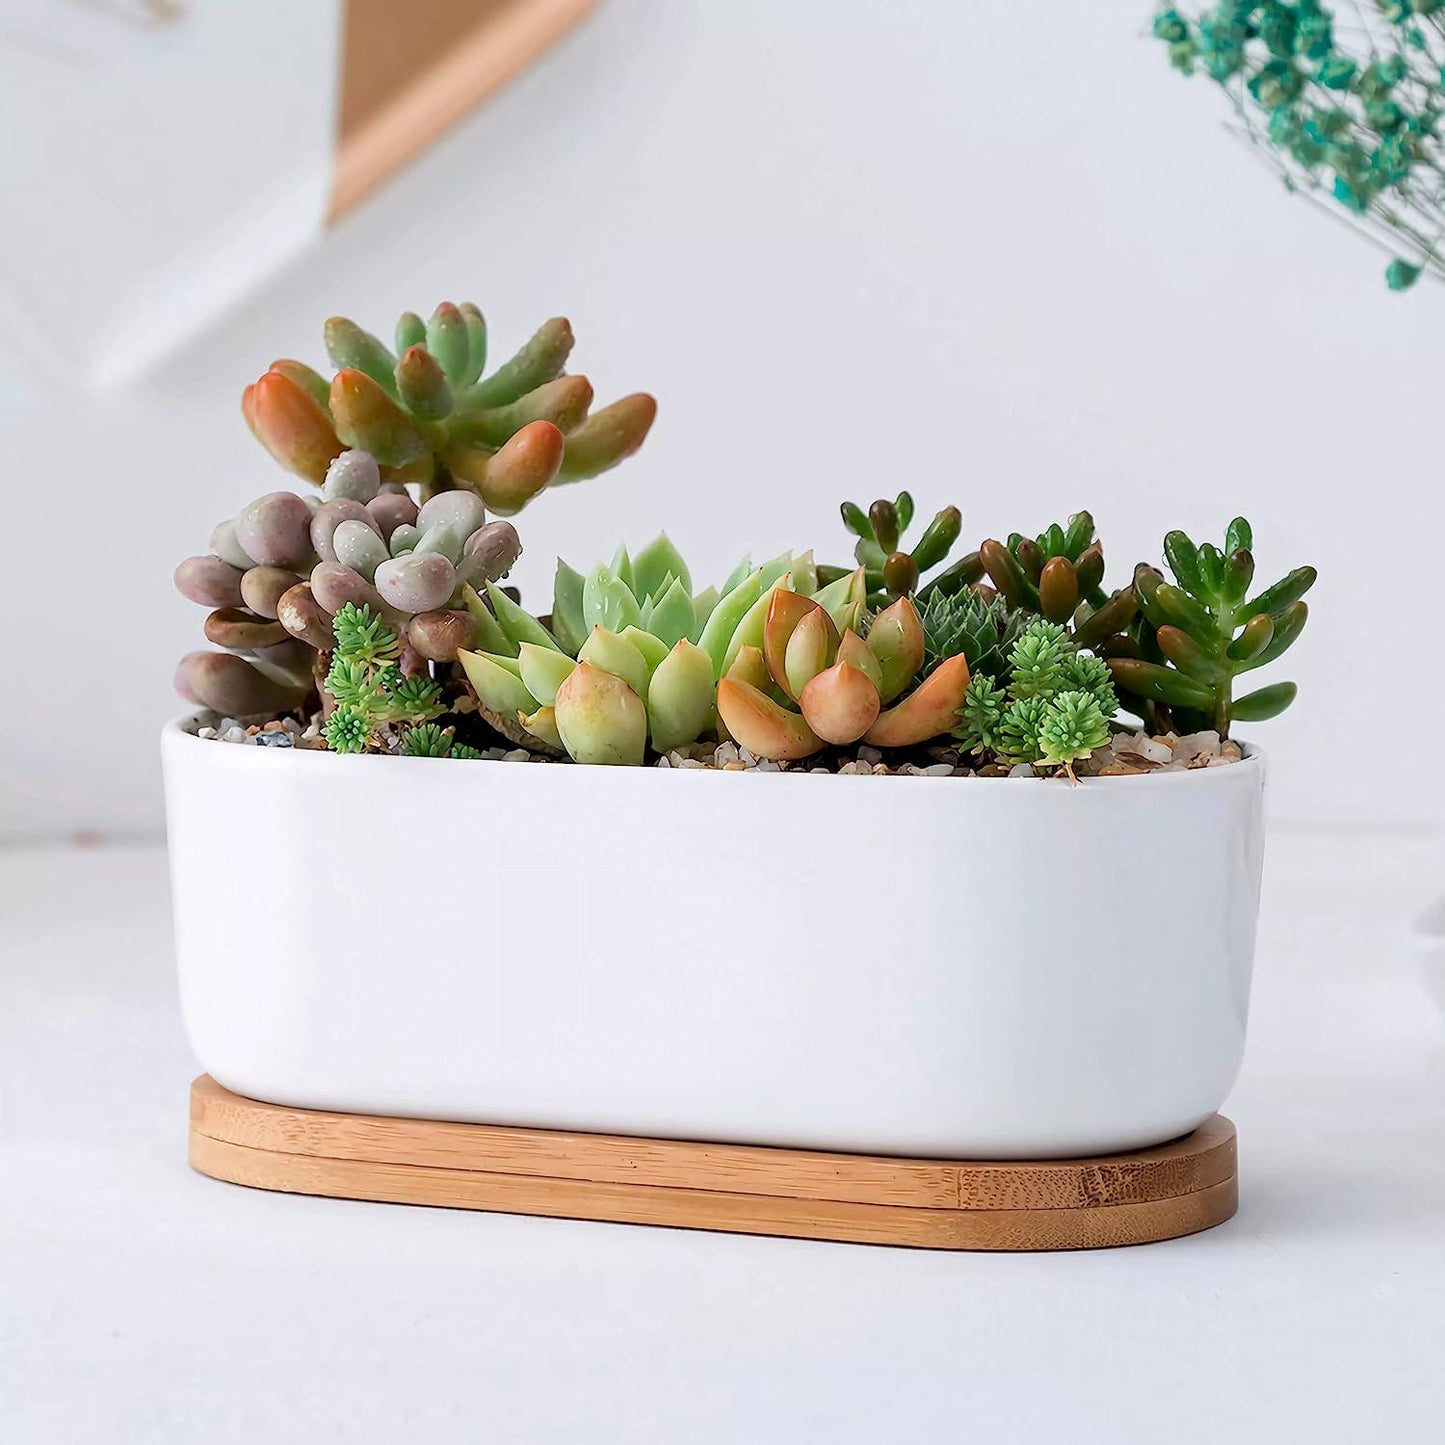 Everyday Better Life Cute Ceramic Home Garden Decoration Succulent Cactus Flower Pots with Bamboo Tray (6.7 Inchs Oval)